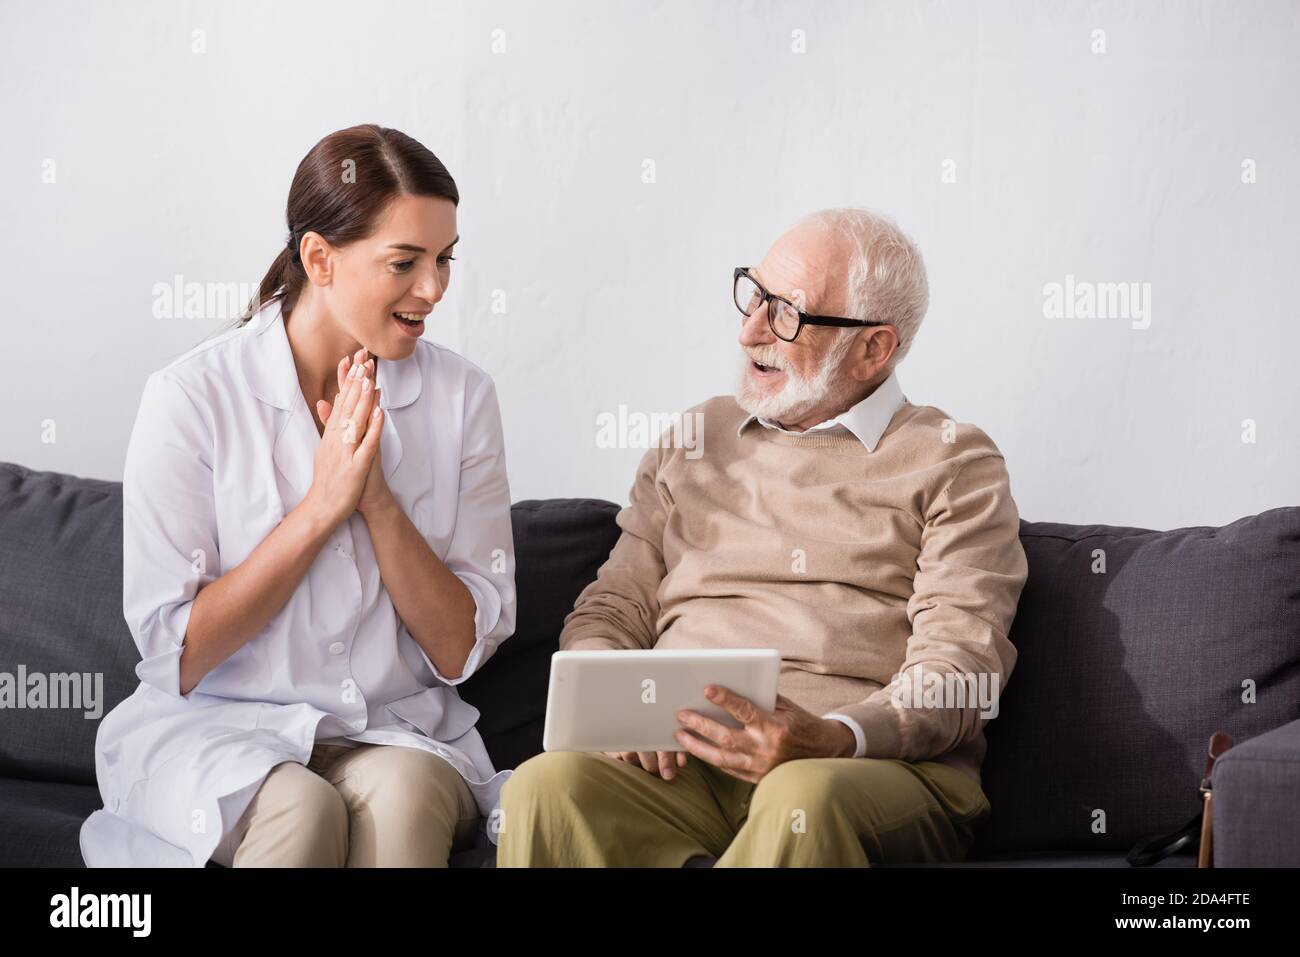 brunette social worker showing wow gesture while looking at aged man holding digital tablet Stock Photo